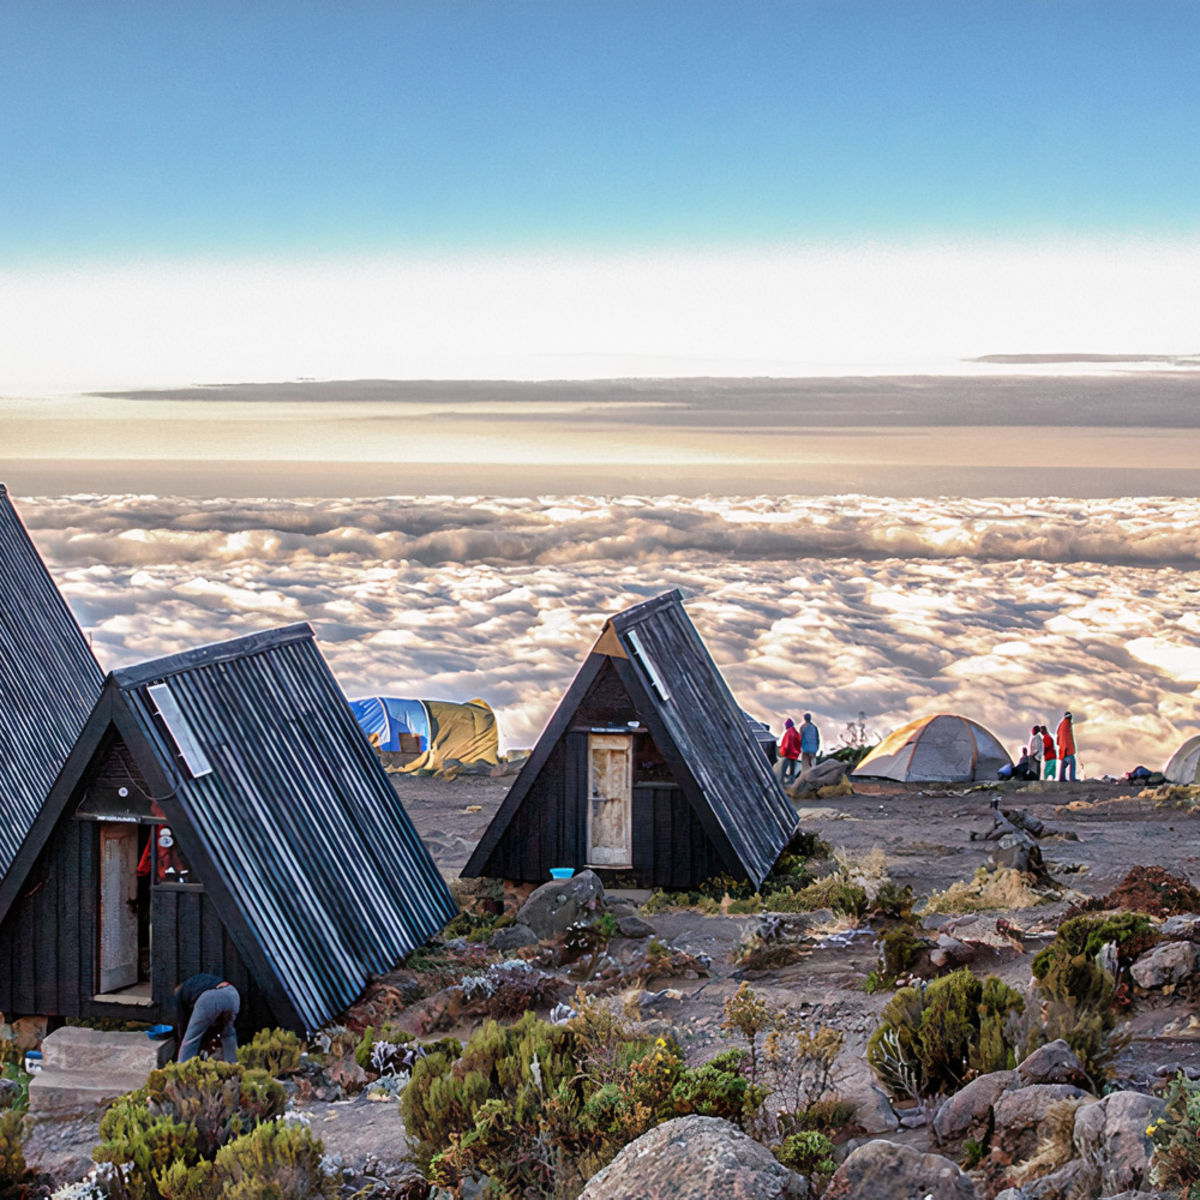 A-frame huts at MArangu route campsite with blanket of cloud below